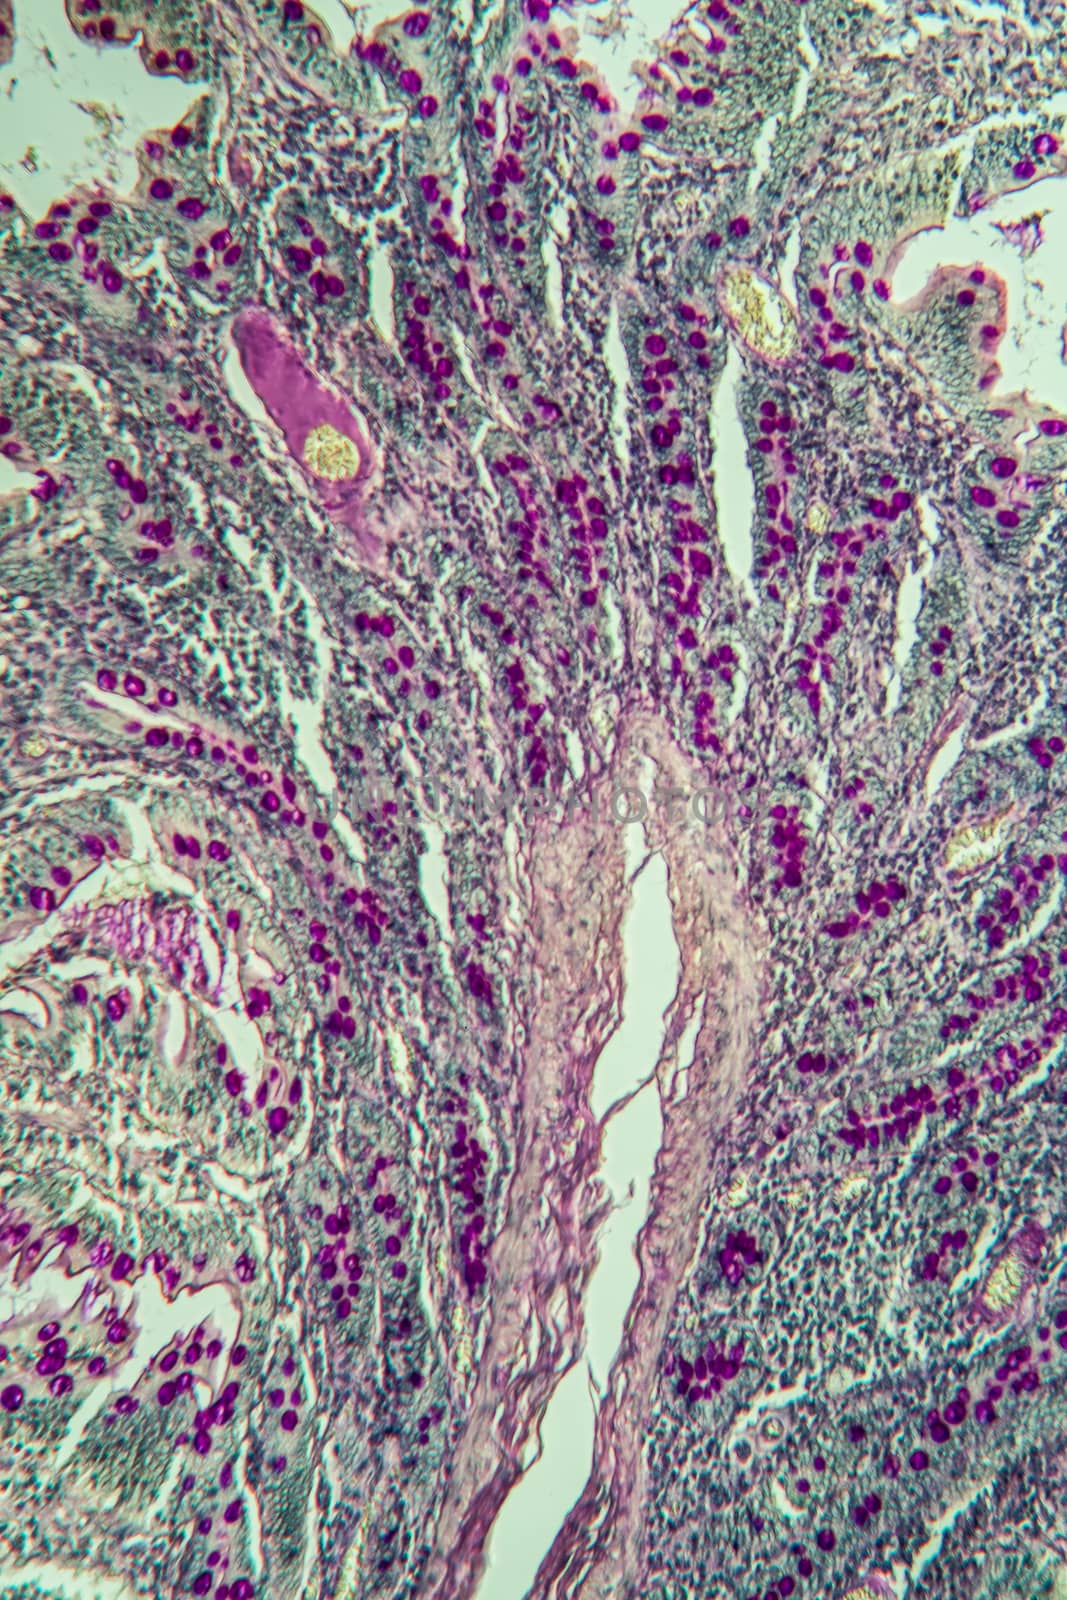 Small intestine pig tissue across 100x by Dr-Lange